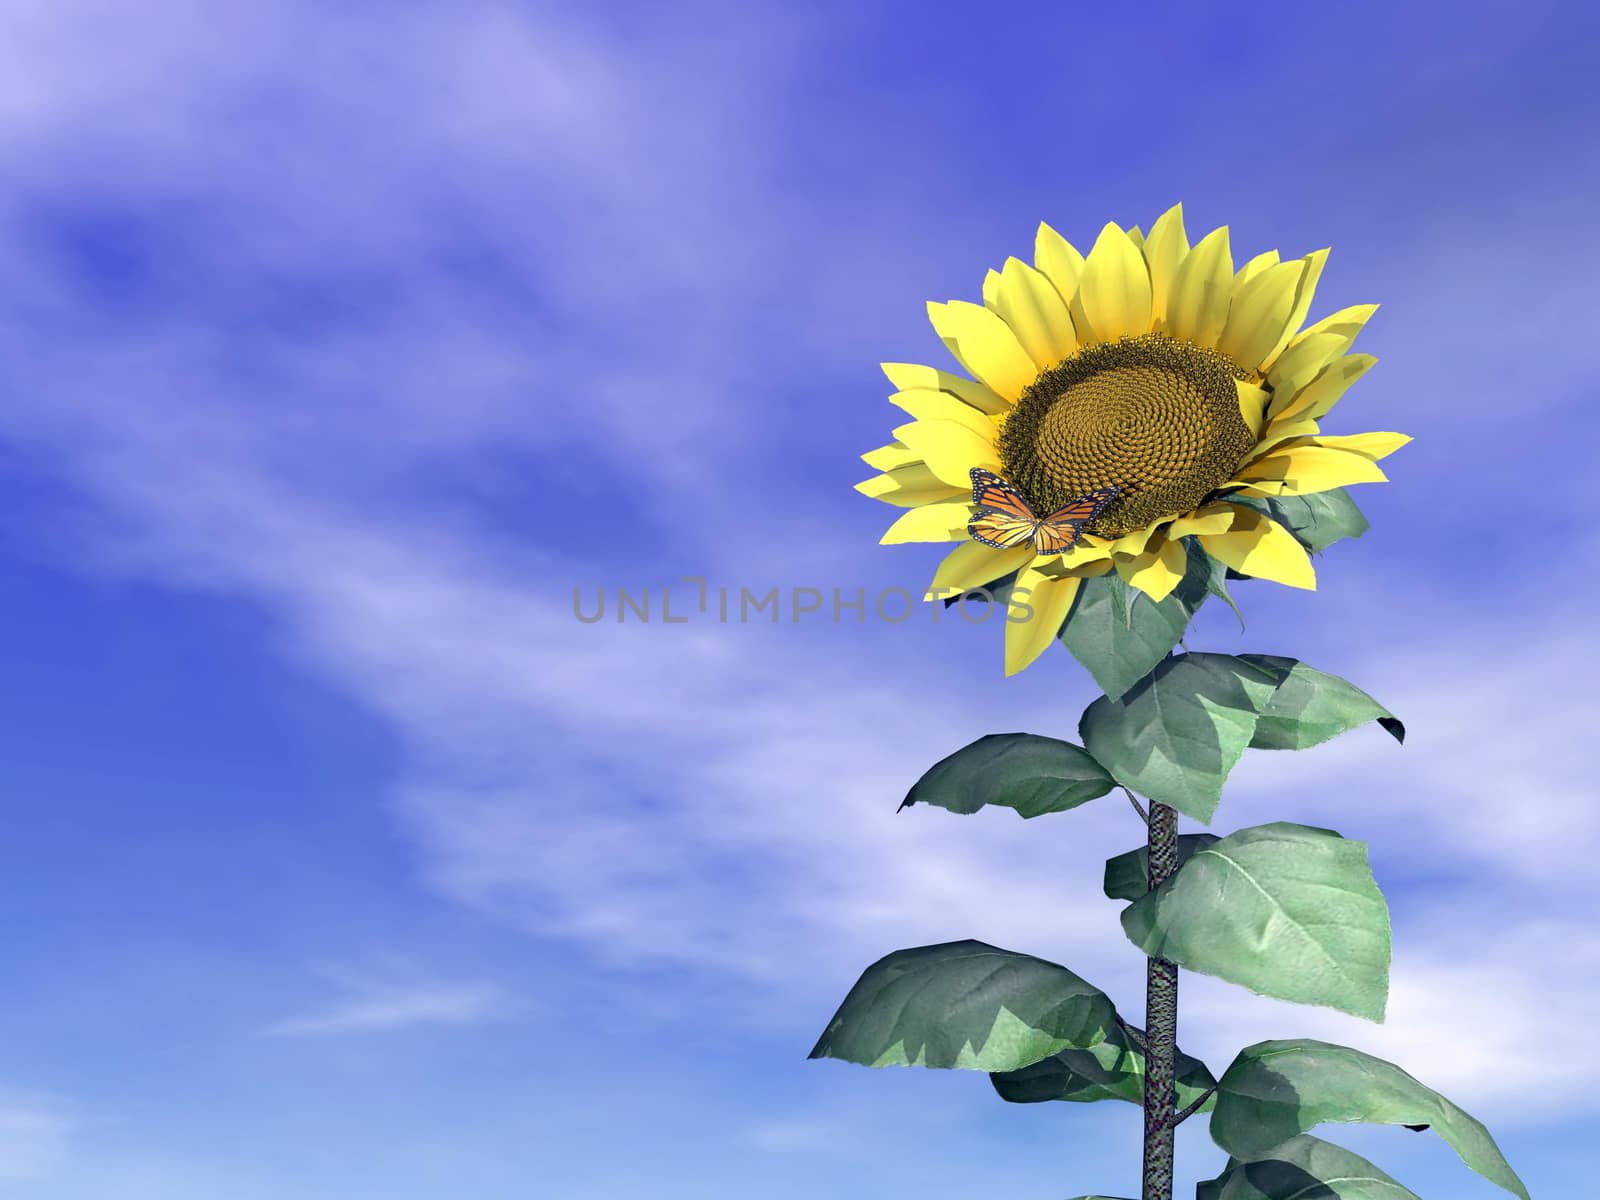 Sunflower and sky - 3D render by Elenaphotos21